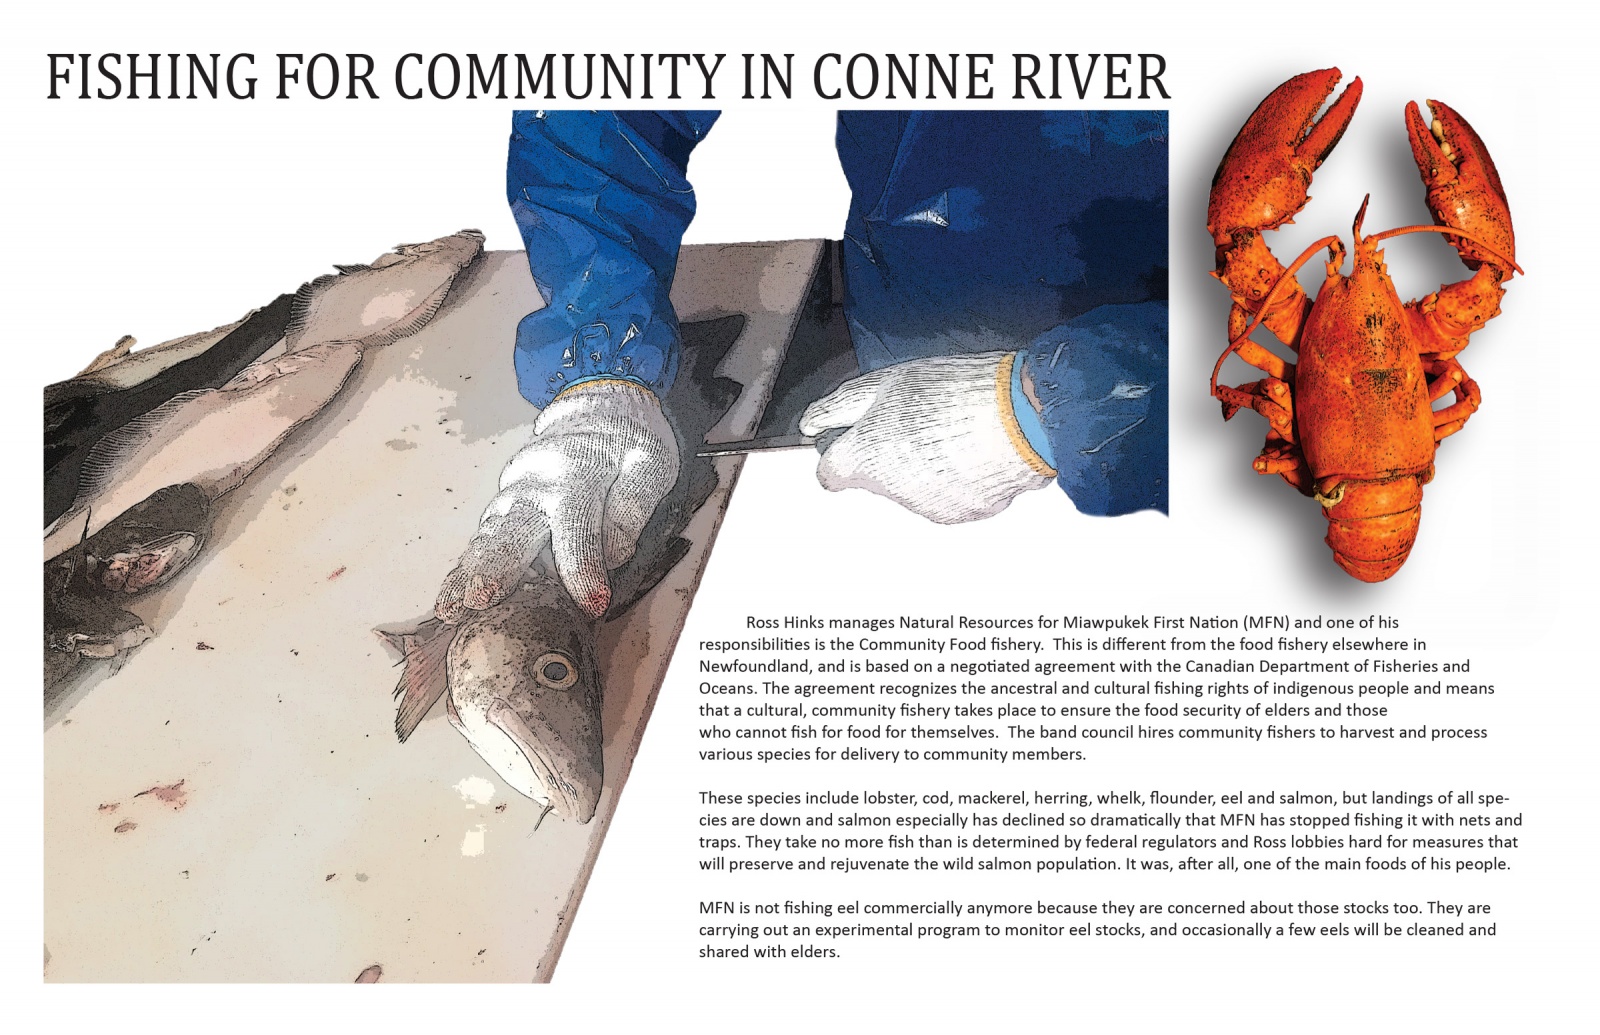 Fishing for Community in Conne River